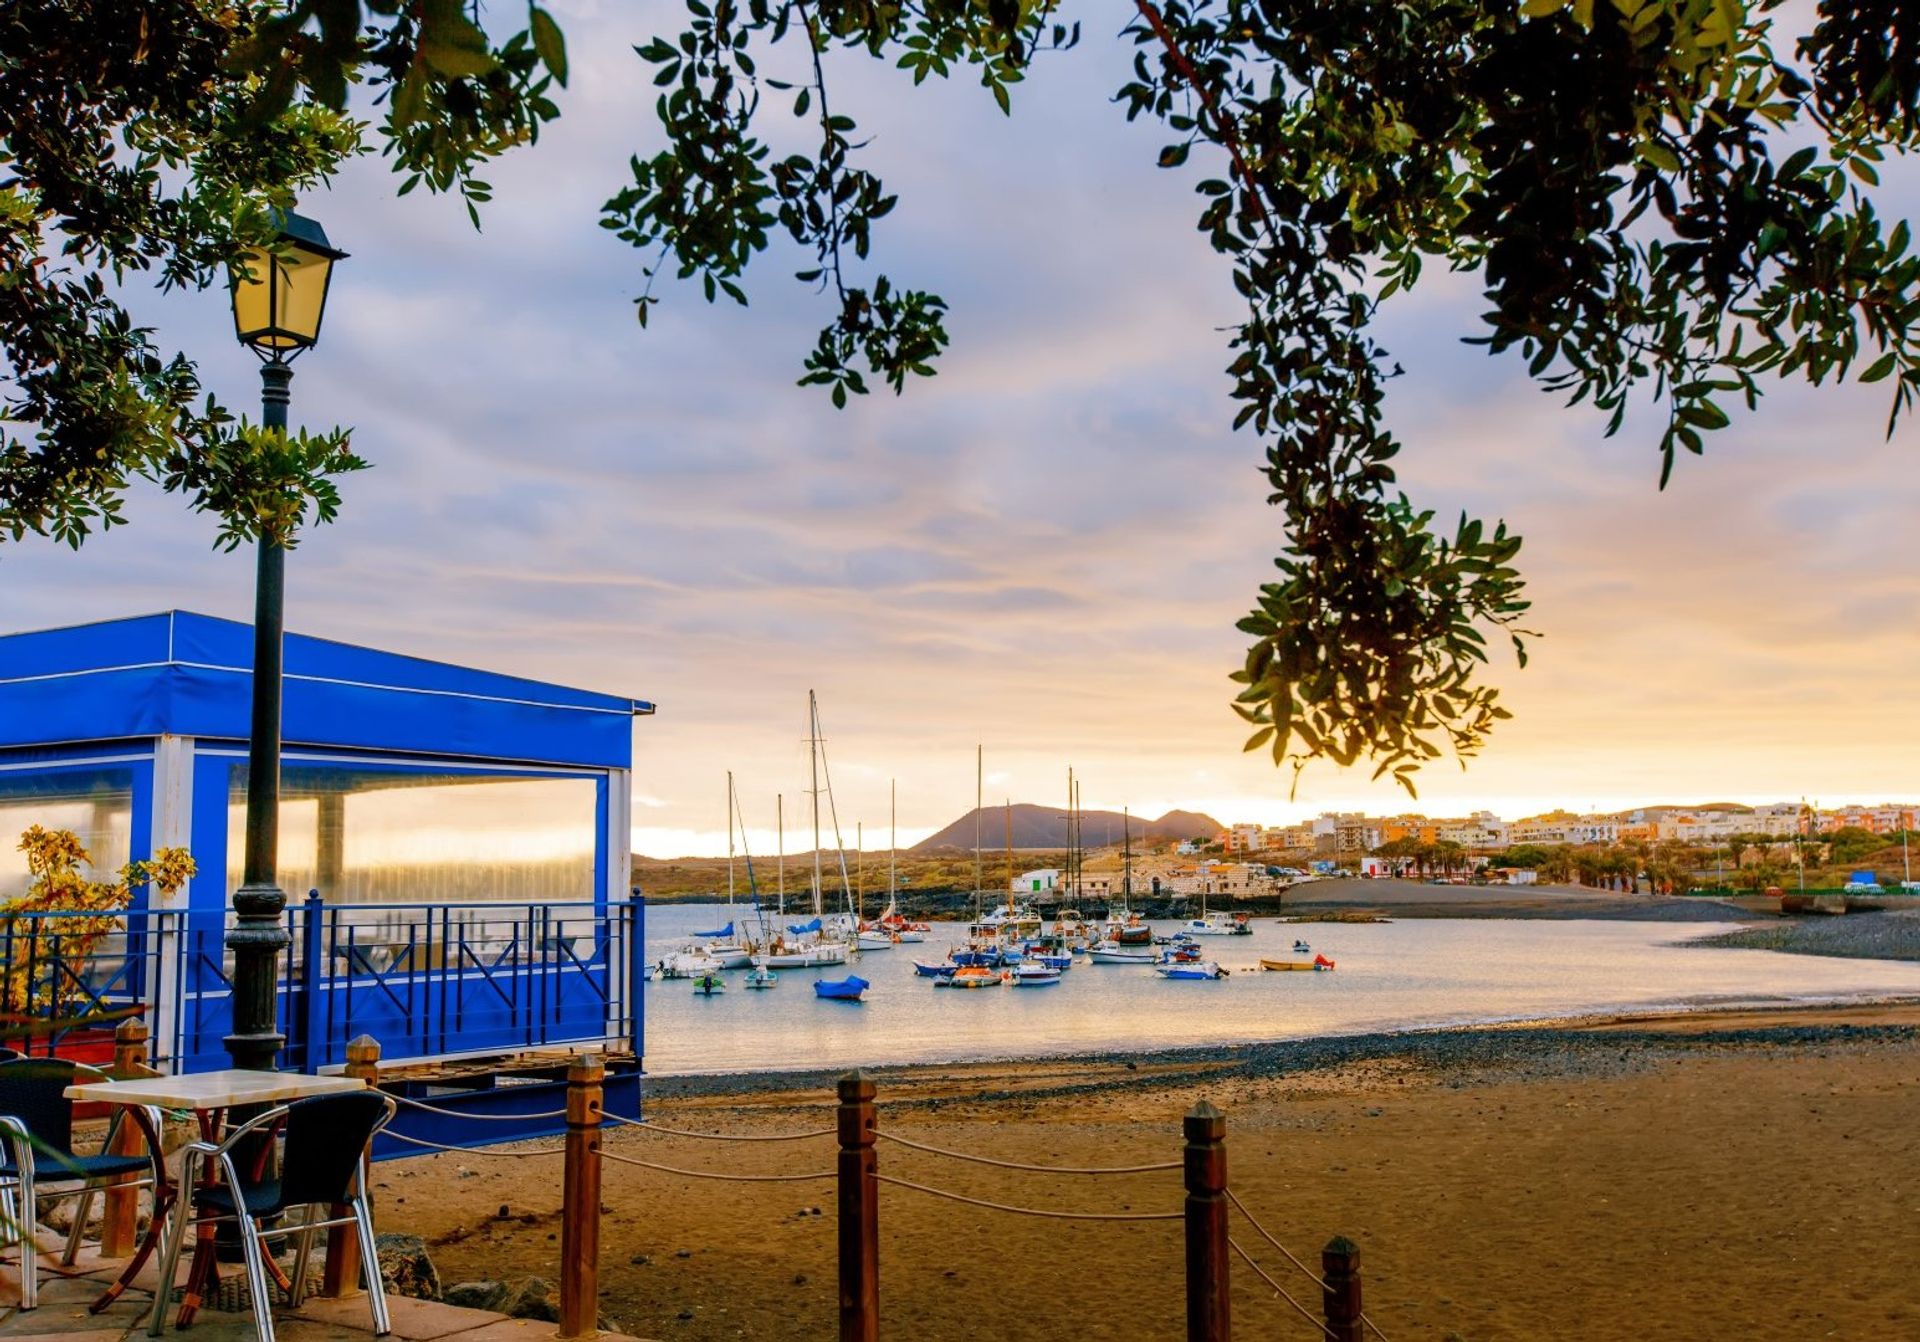 Las Galletas is some 20 minutes from Arona, dotted with lovely cafes fronting the coast